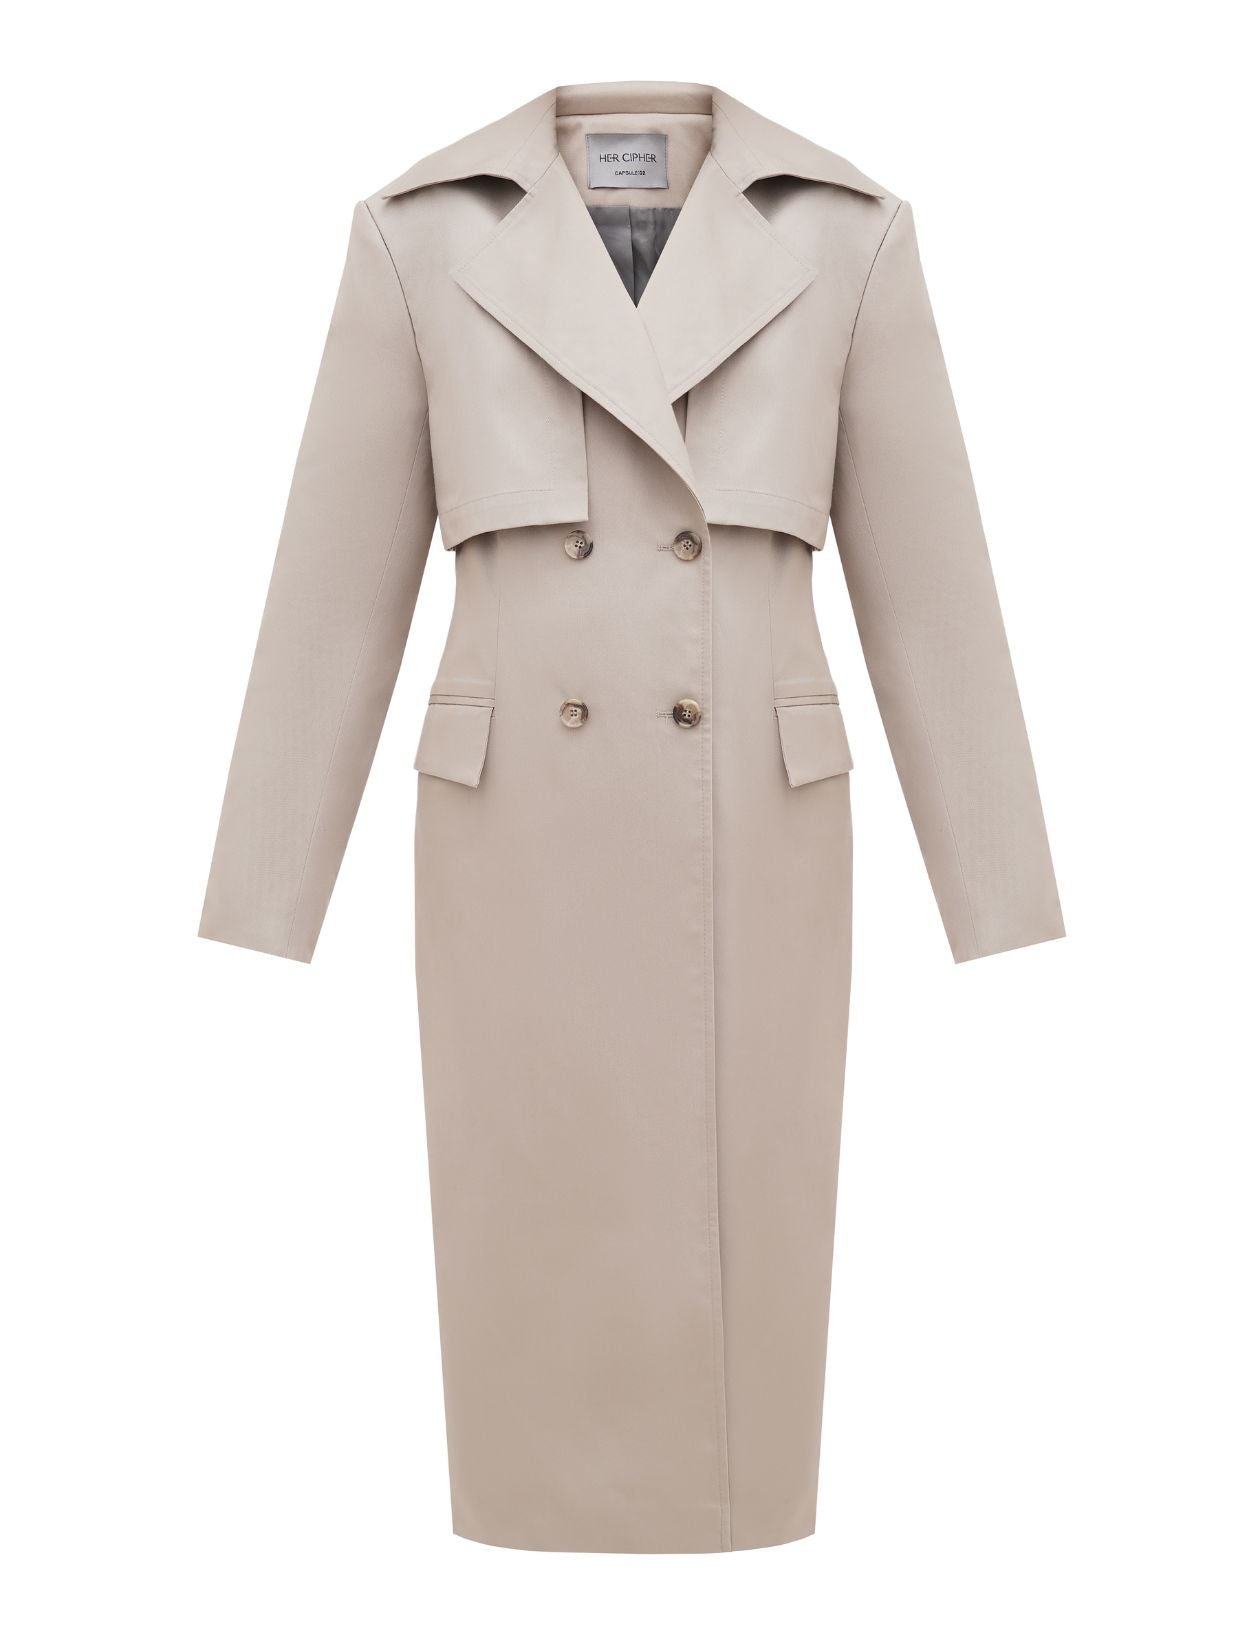 Beige trench coat recycled polyester and organic cotton blend with four front buttons